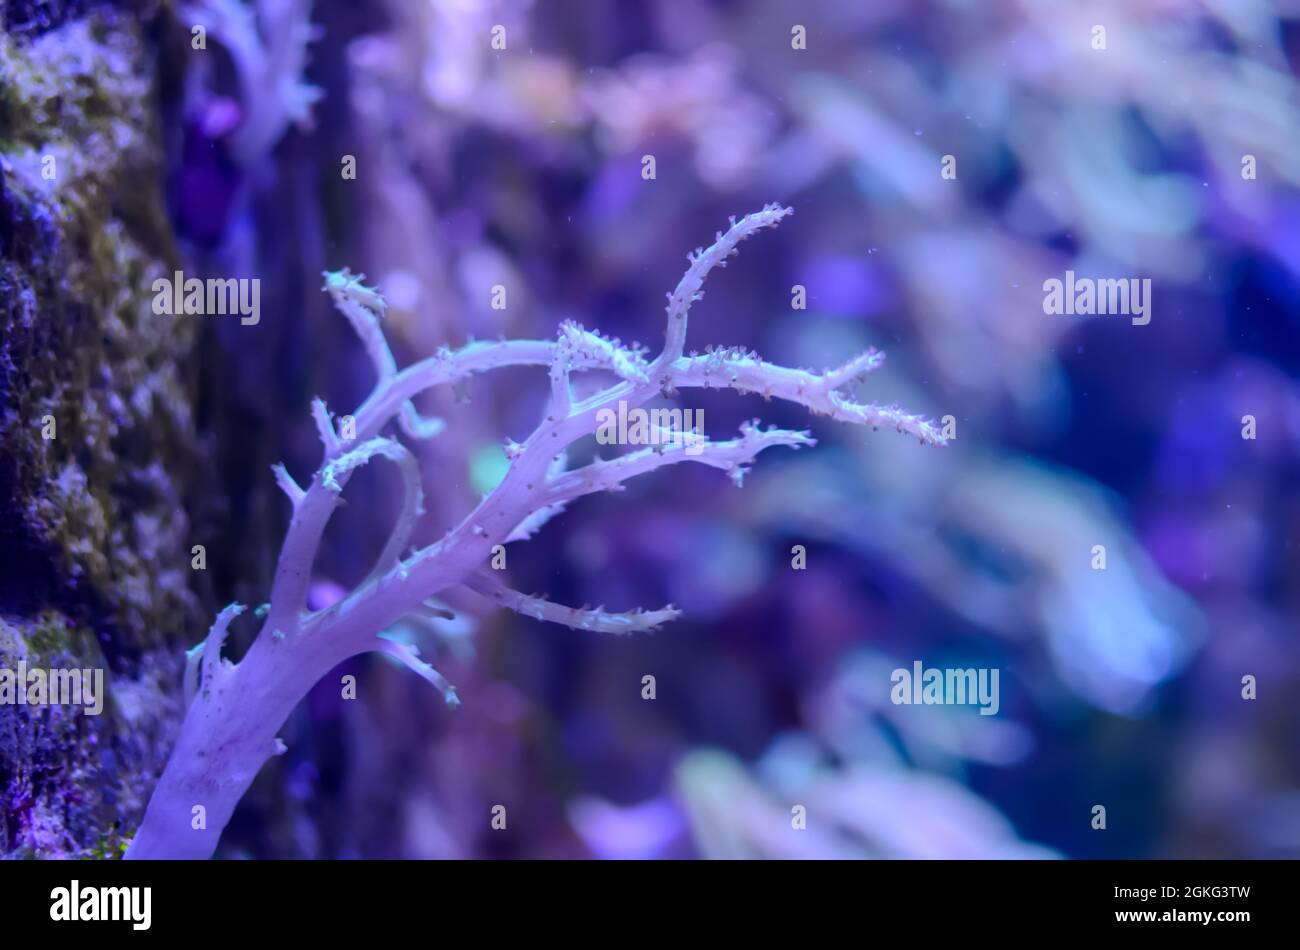 Tree-like coral under water in blue light Stock Photo